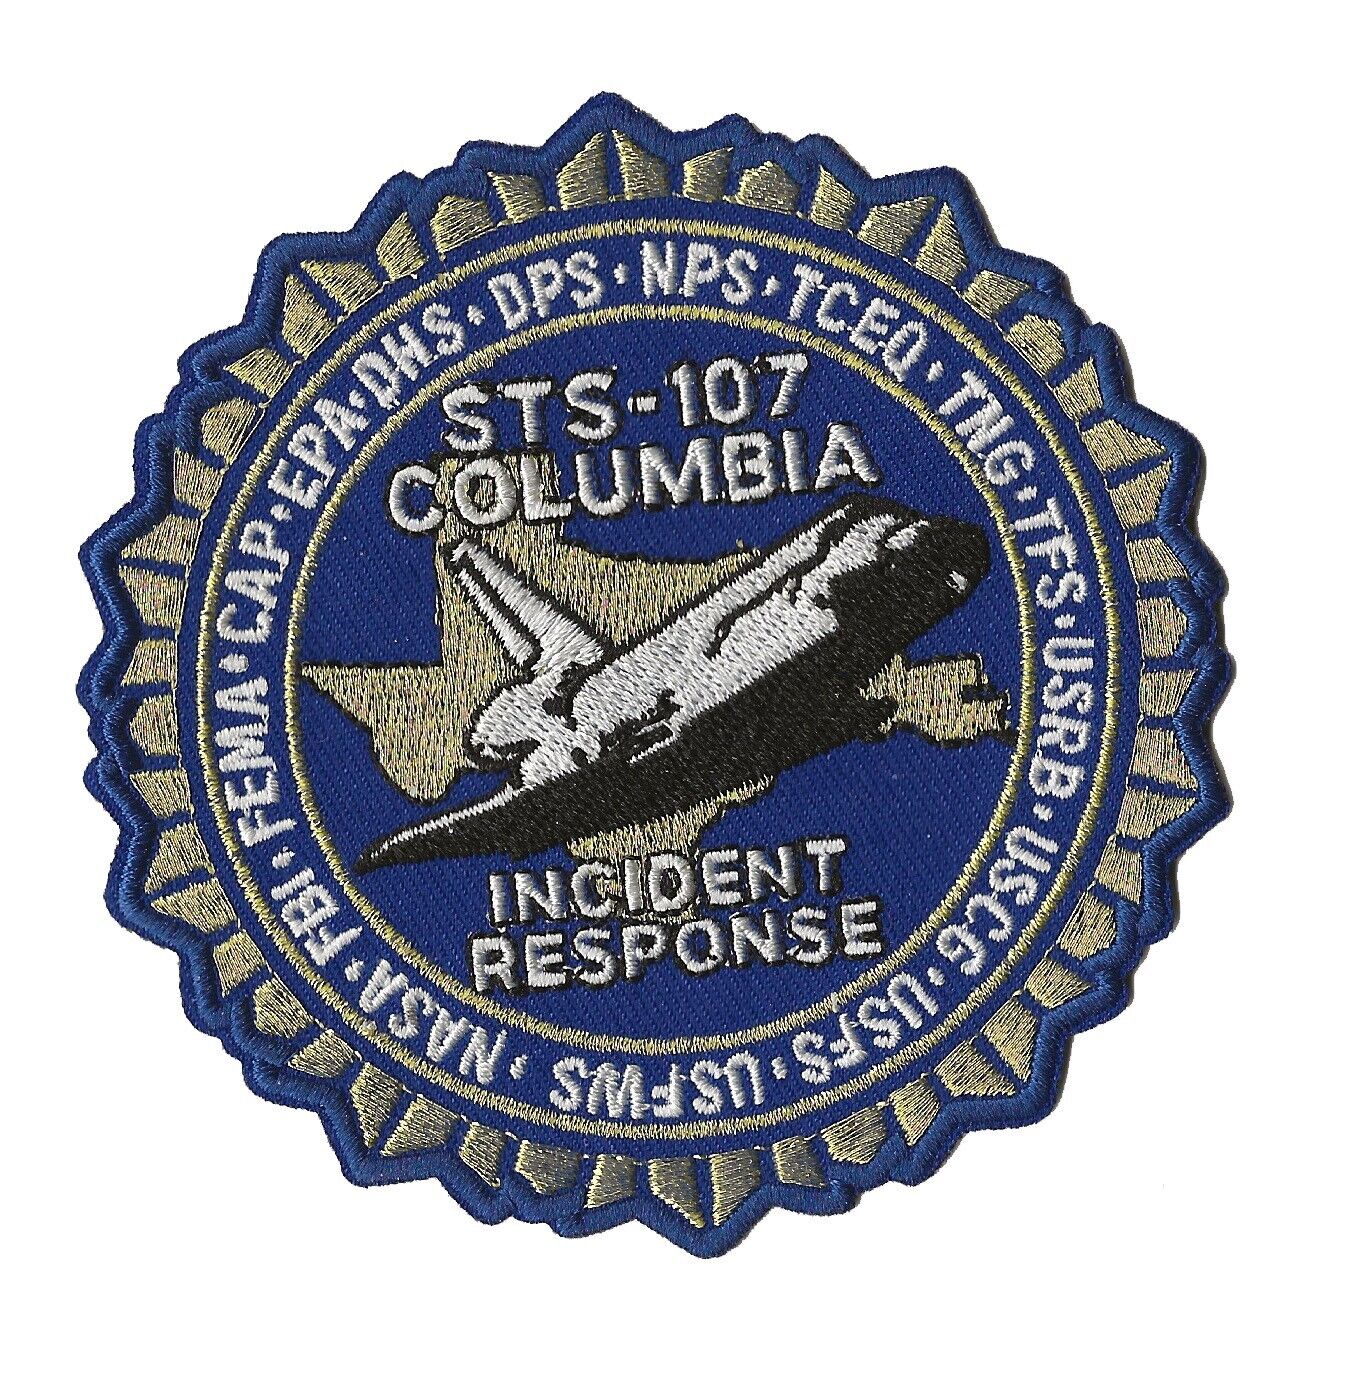 STS-107 NASA space shuttle Columbia FBI Incident Response recovery patch